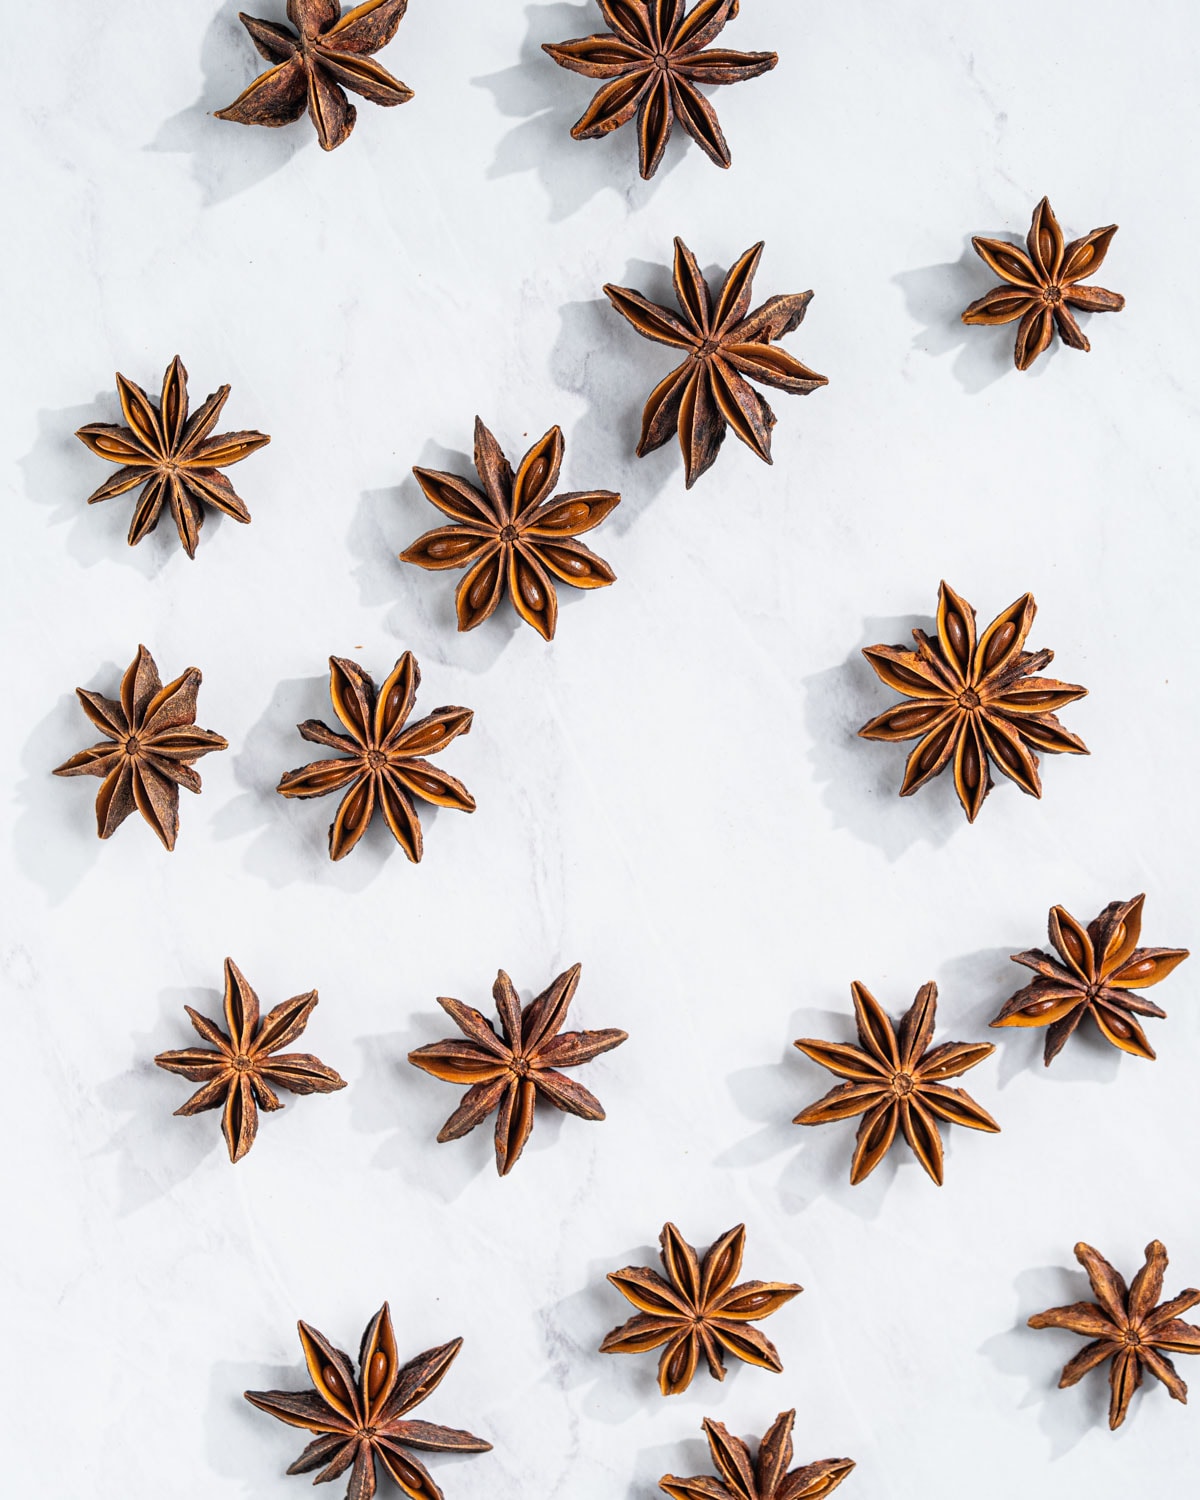 About 20 star anise pods scattered on a marble surface.